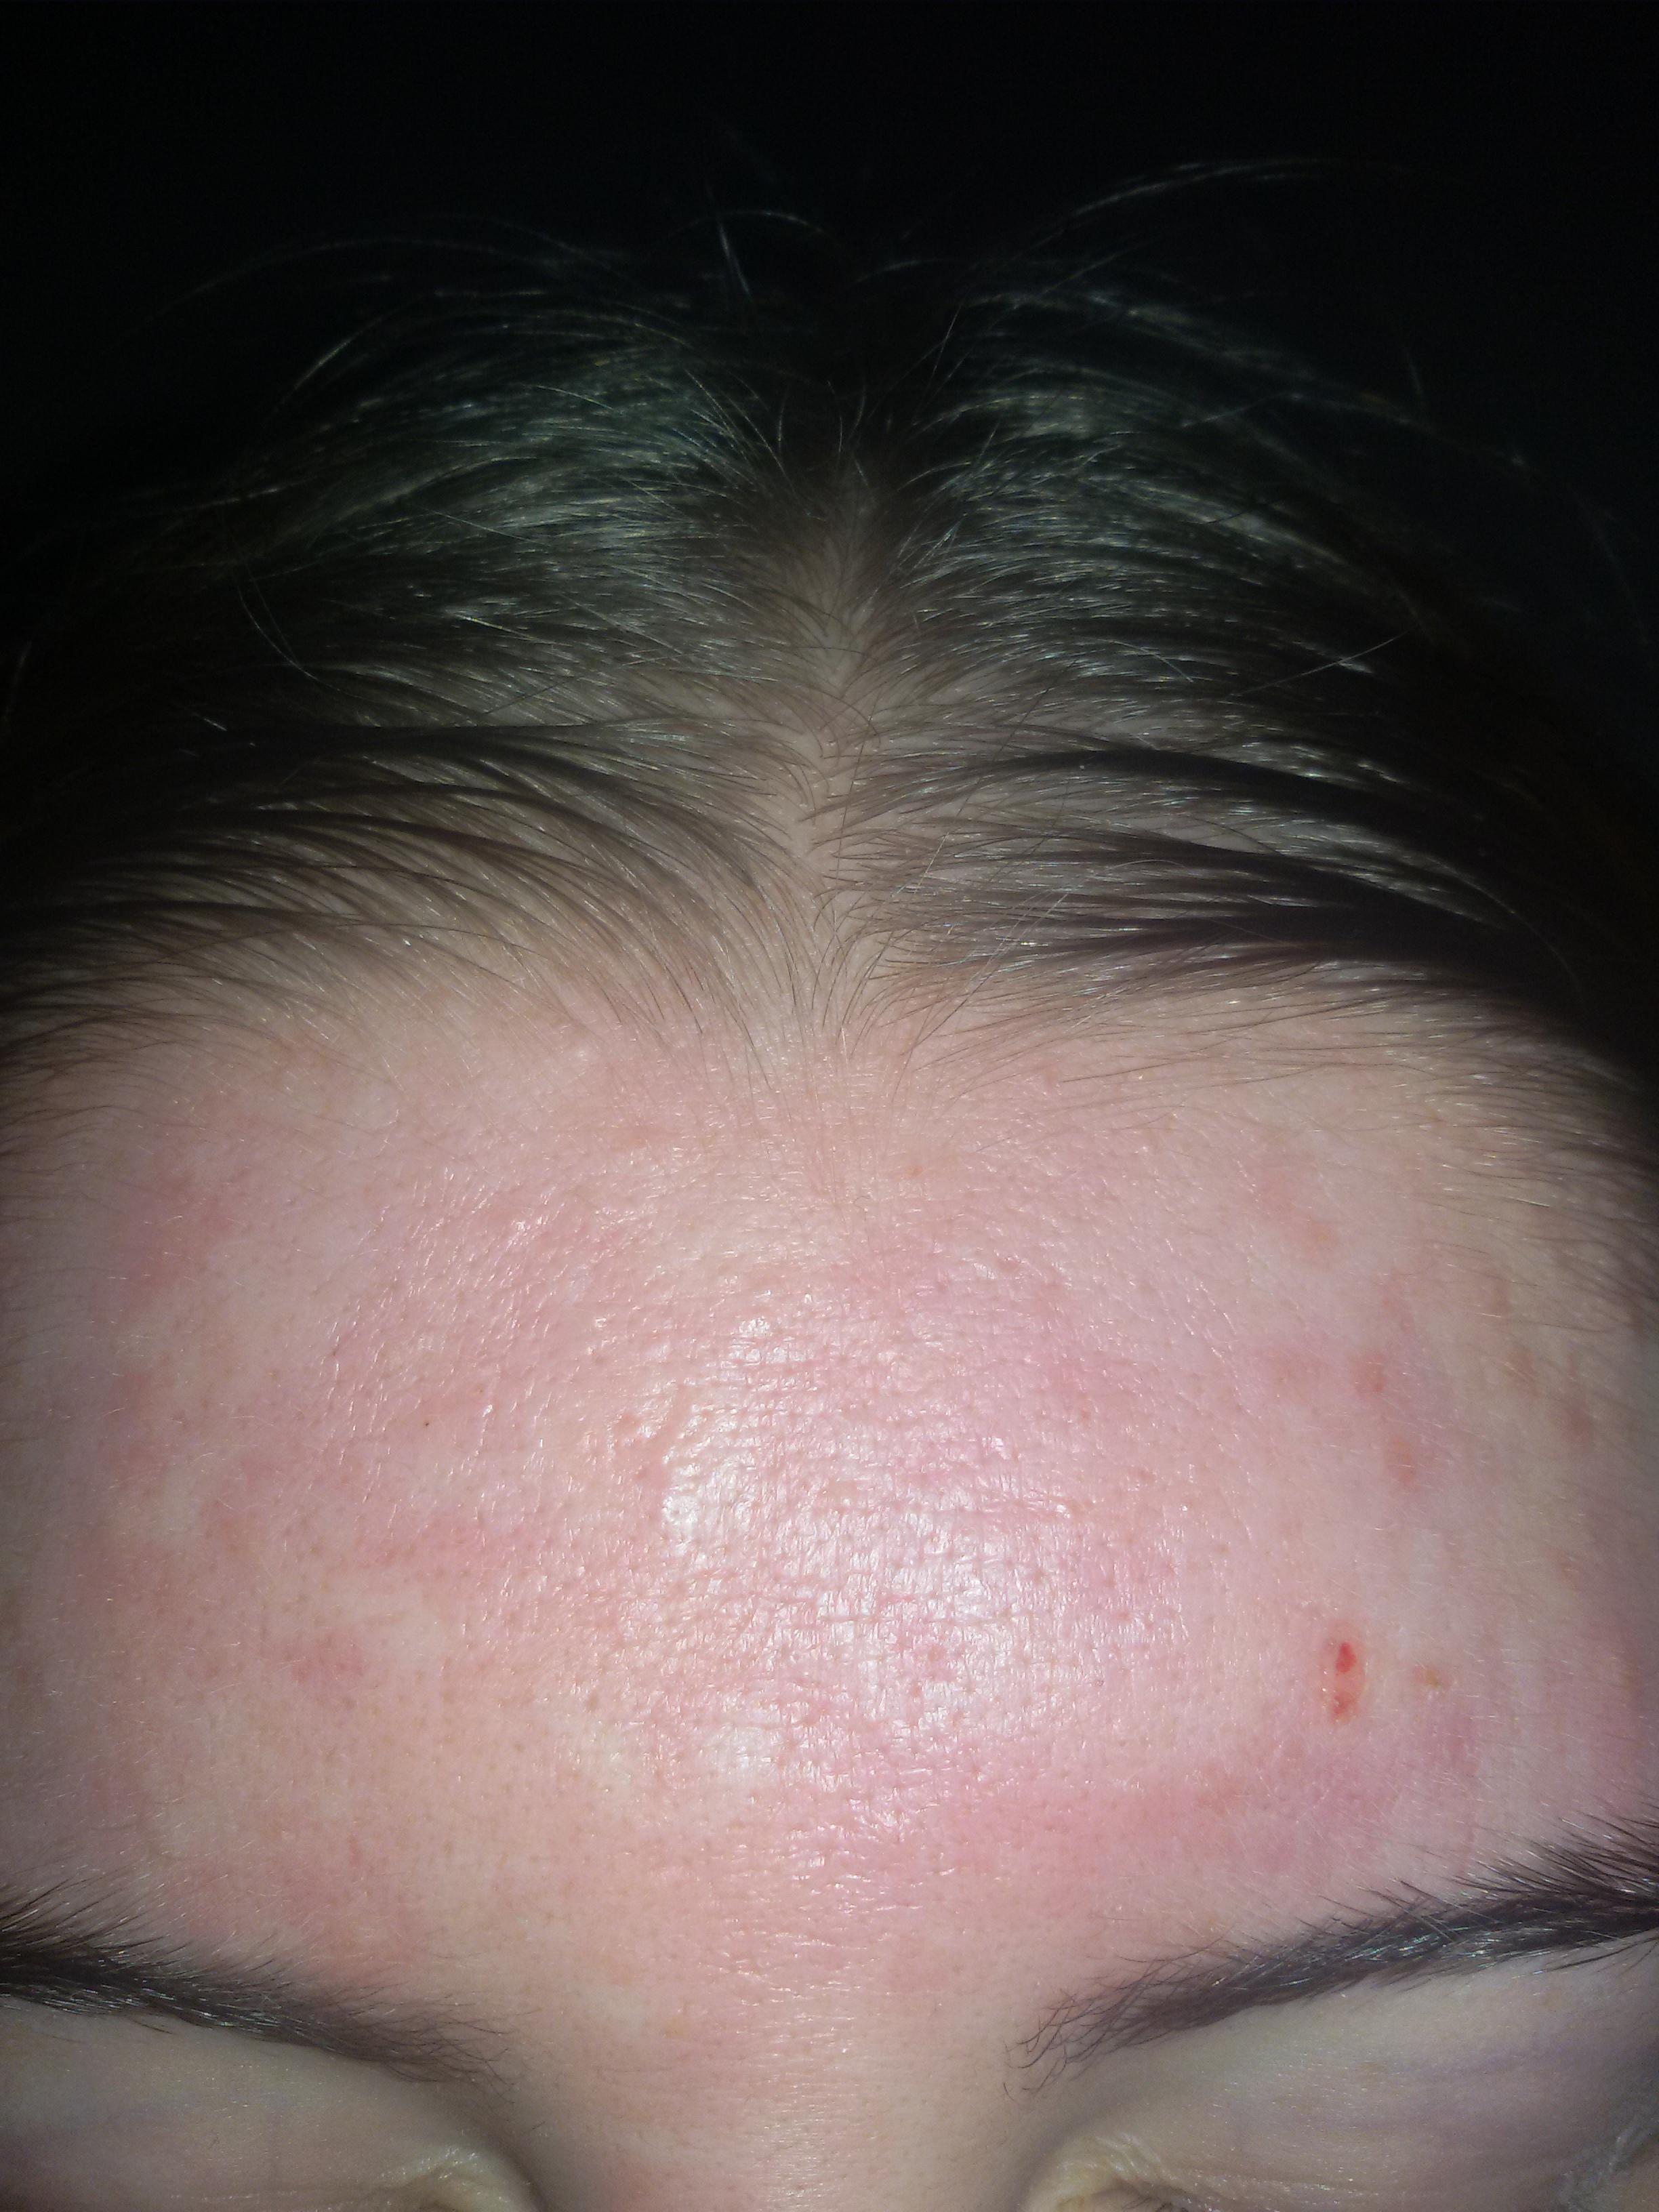 Blackheads And Scars On Forehead General Acne Discussion Forum